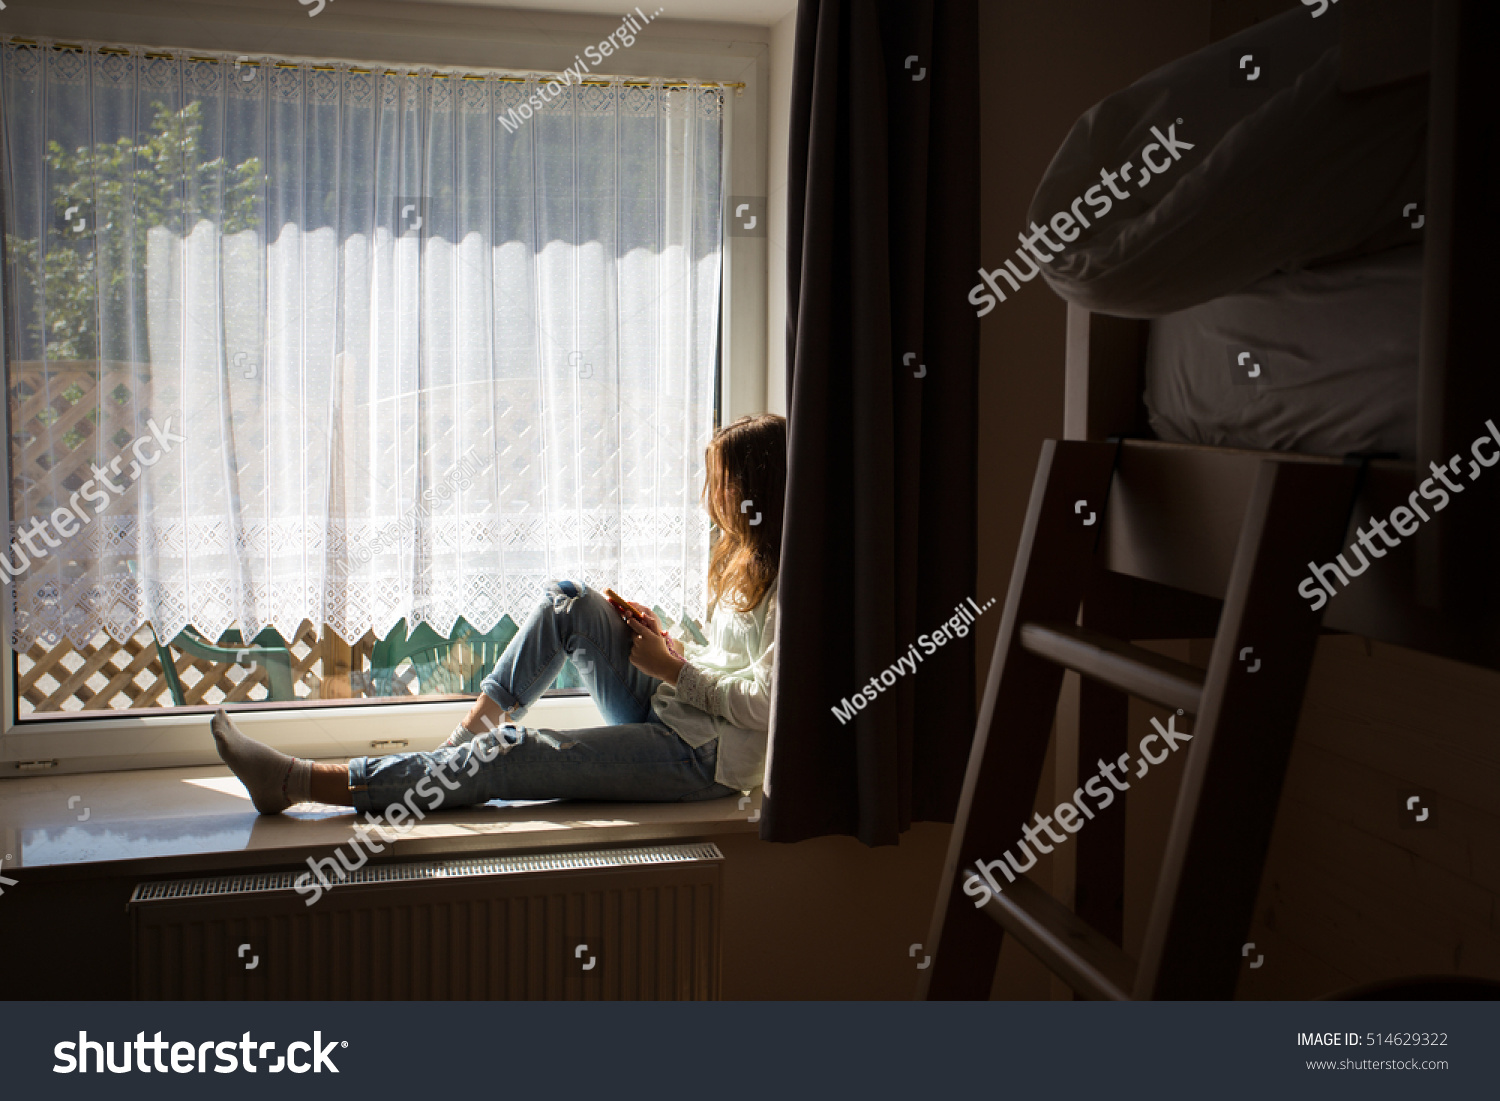 teen girl sitting on a windowsill with a smartphone in the children's room
 #514629322